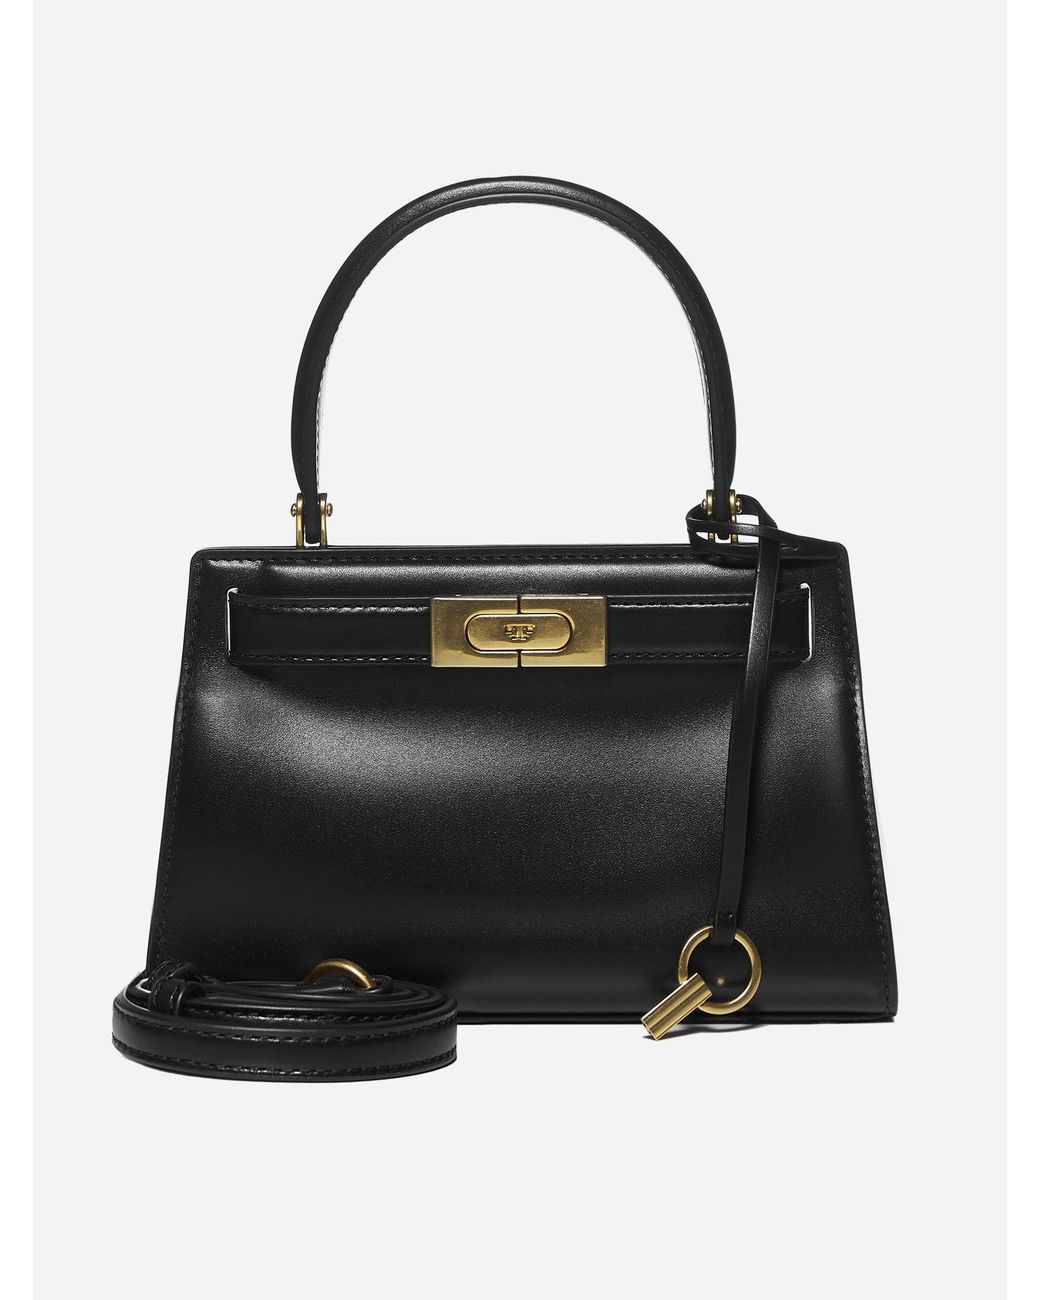 Tory Burch Lee Radziwill Small Leather Bag in Black | Lyst UK